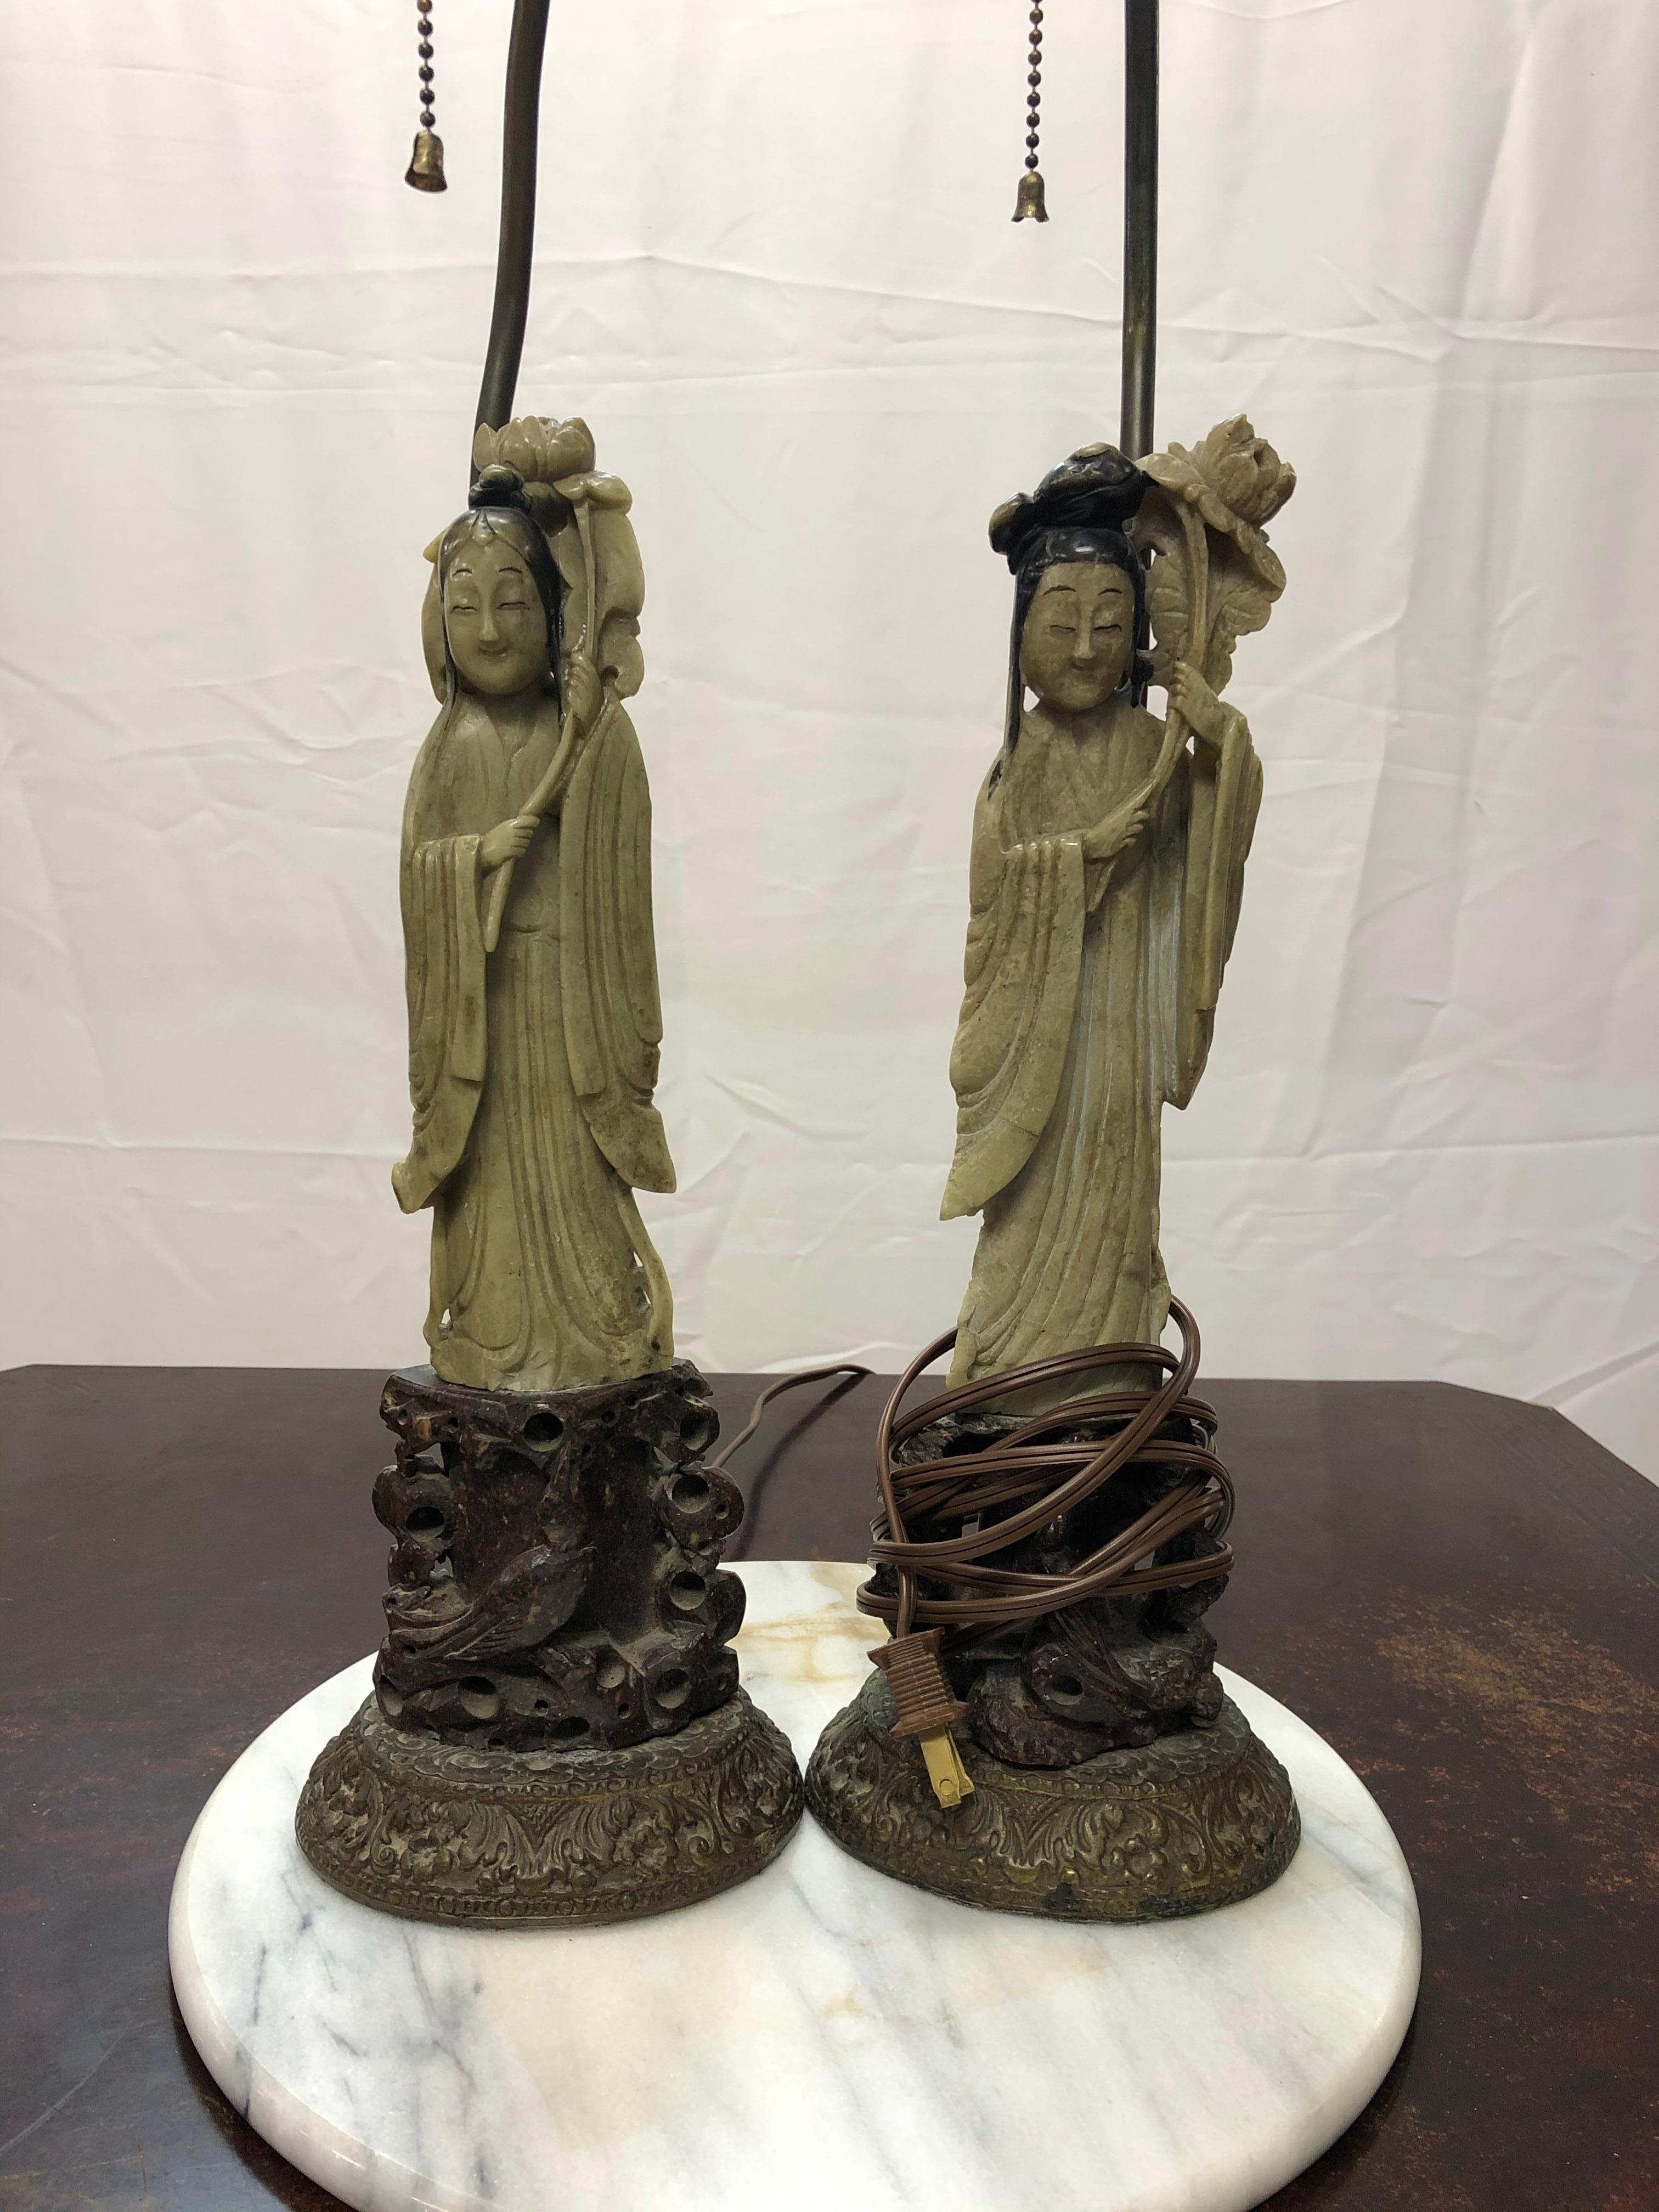 Fabulous pair of early 20th century hardstone Chinese figural lamps. The finials are jade and come with the original silk shades. They measure 12 1/2 inches high with the base and 11 1/2 without. Each lamp is approximately 16 inches wide.